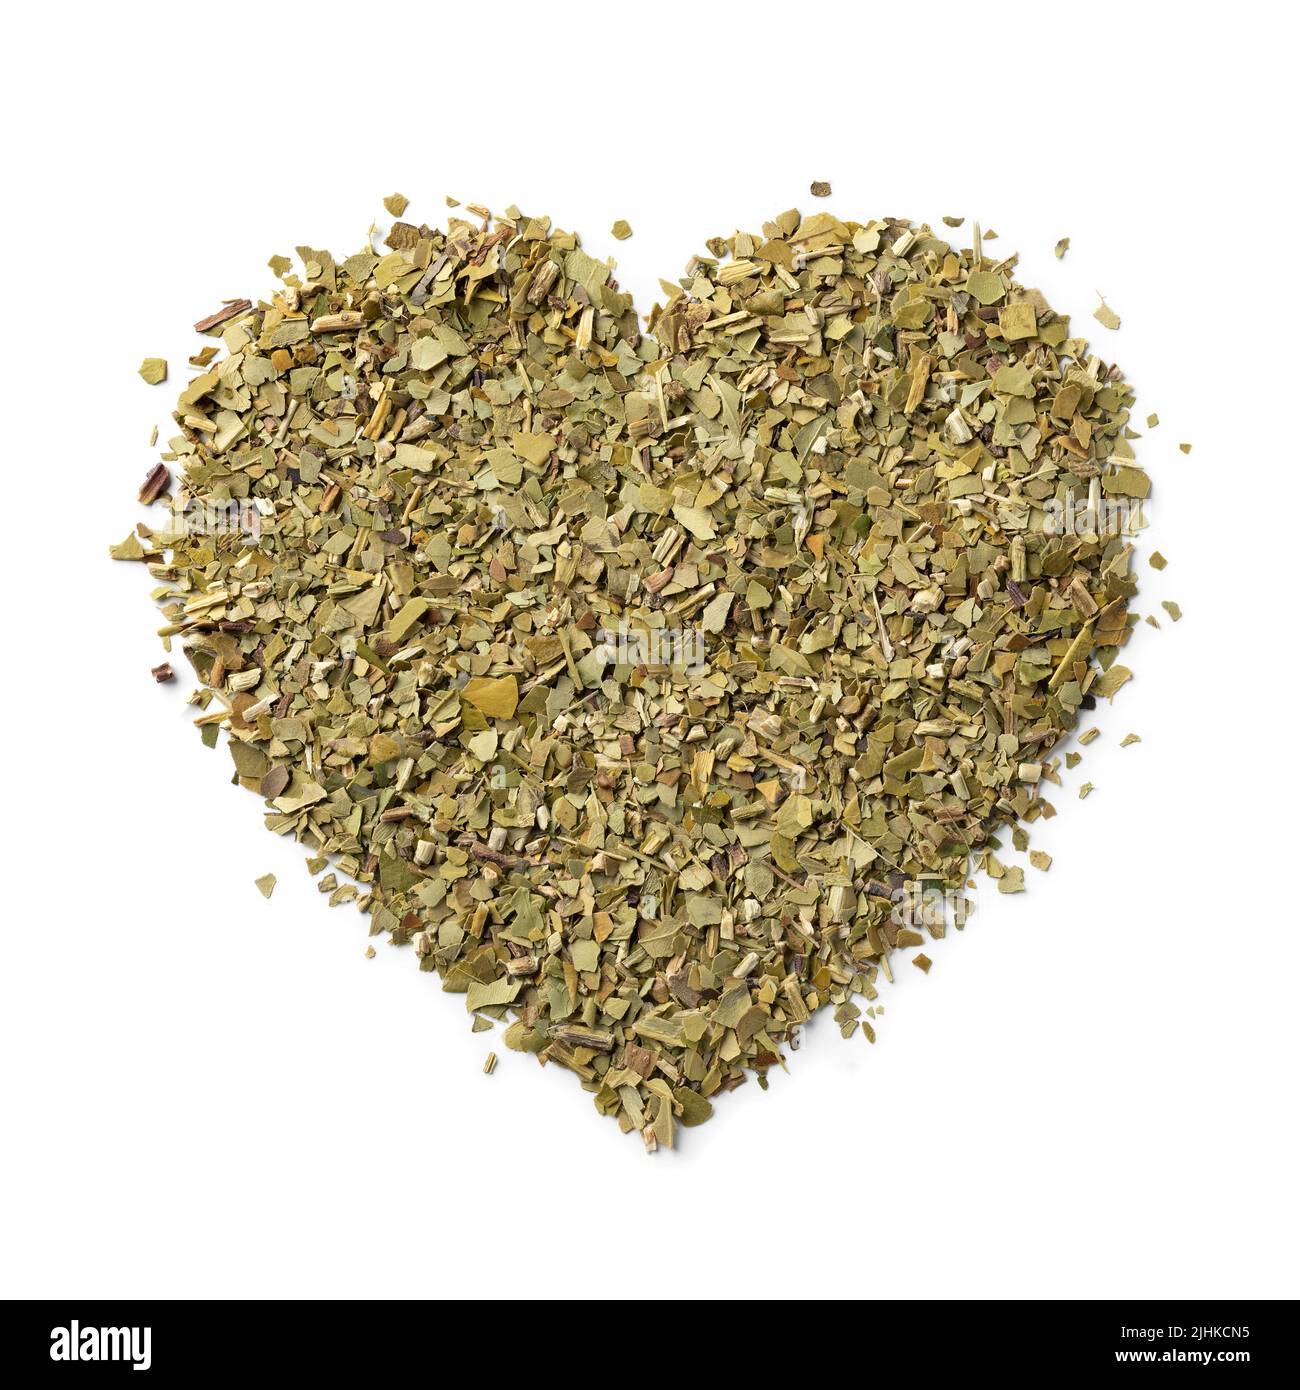 Dried  traditional South American caffeine rich  Mate tea leaves in heart shape close up Stock Photo